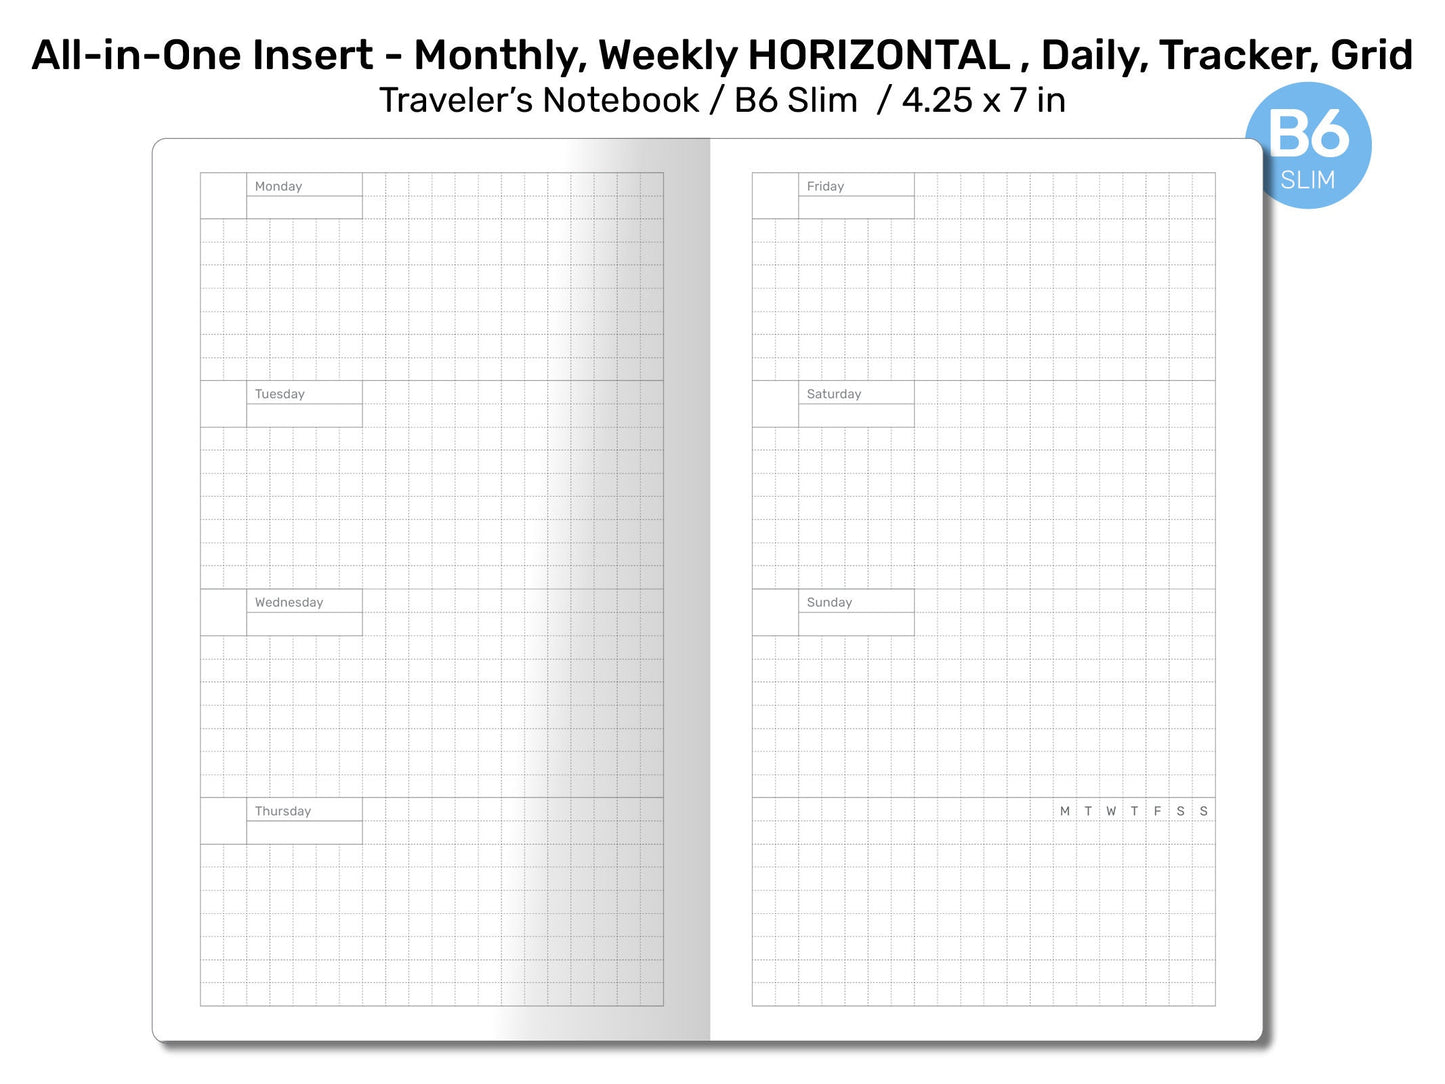 B6 Slim TN All-in-One Monthly, Weekly HORIZONTAL, Tracker To Do, List, Grid Printable Traveler's Notebook Printable Refill Insert B6SL22-002